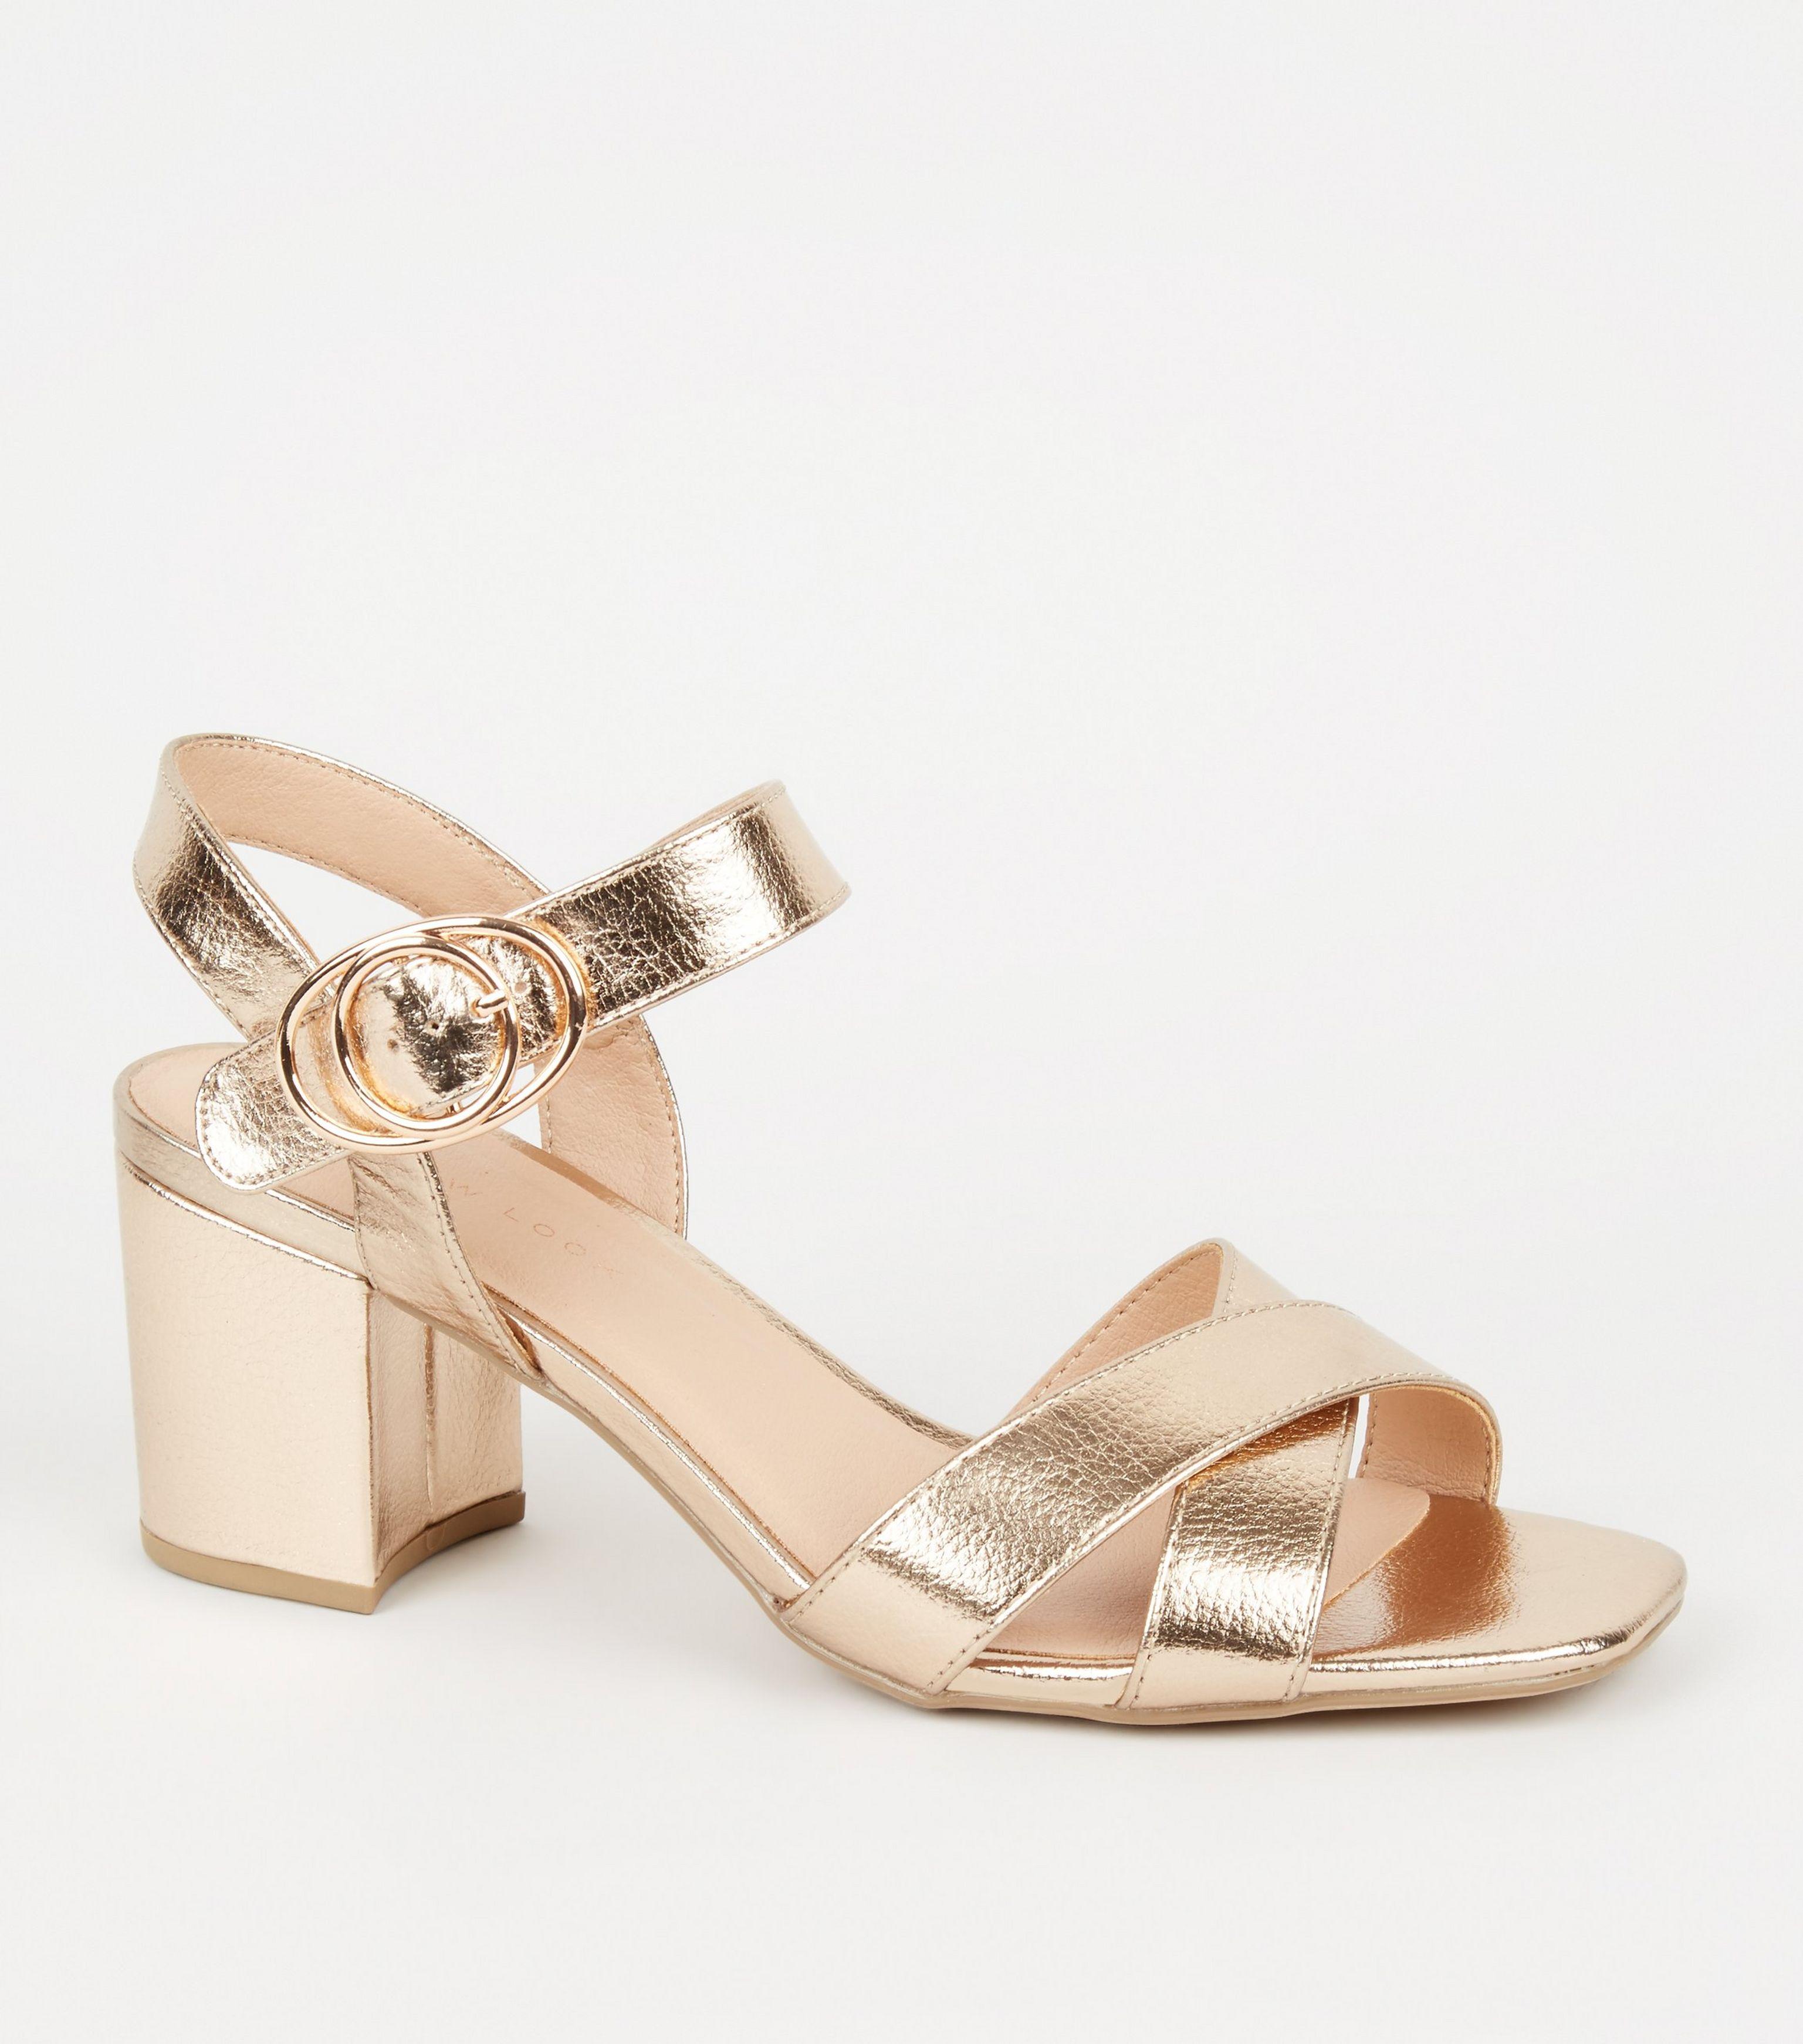 New Look Leather Wide Fit Rose Gold Block Heel Sandals - Lyst